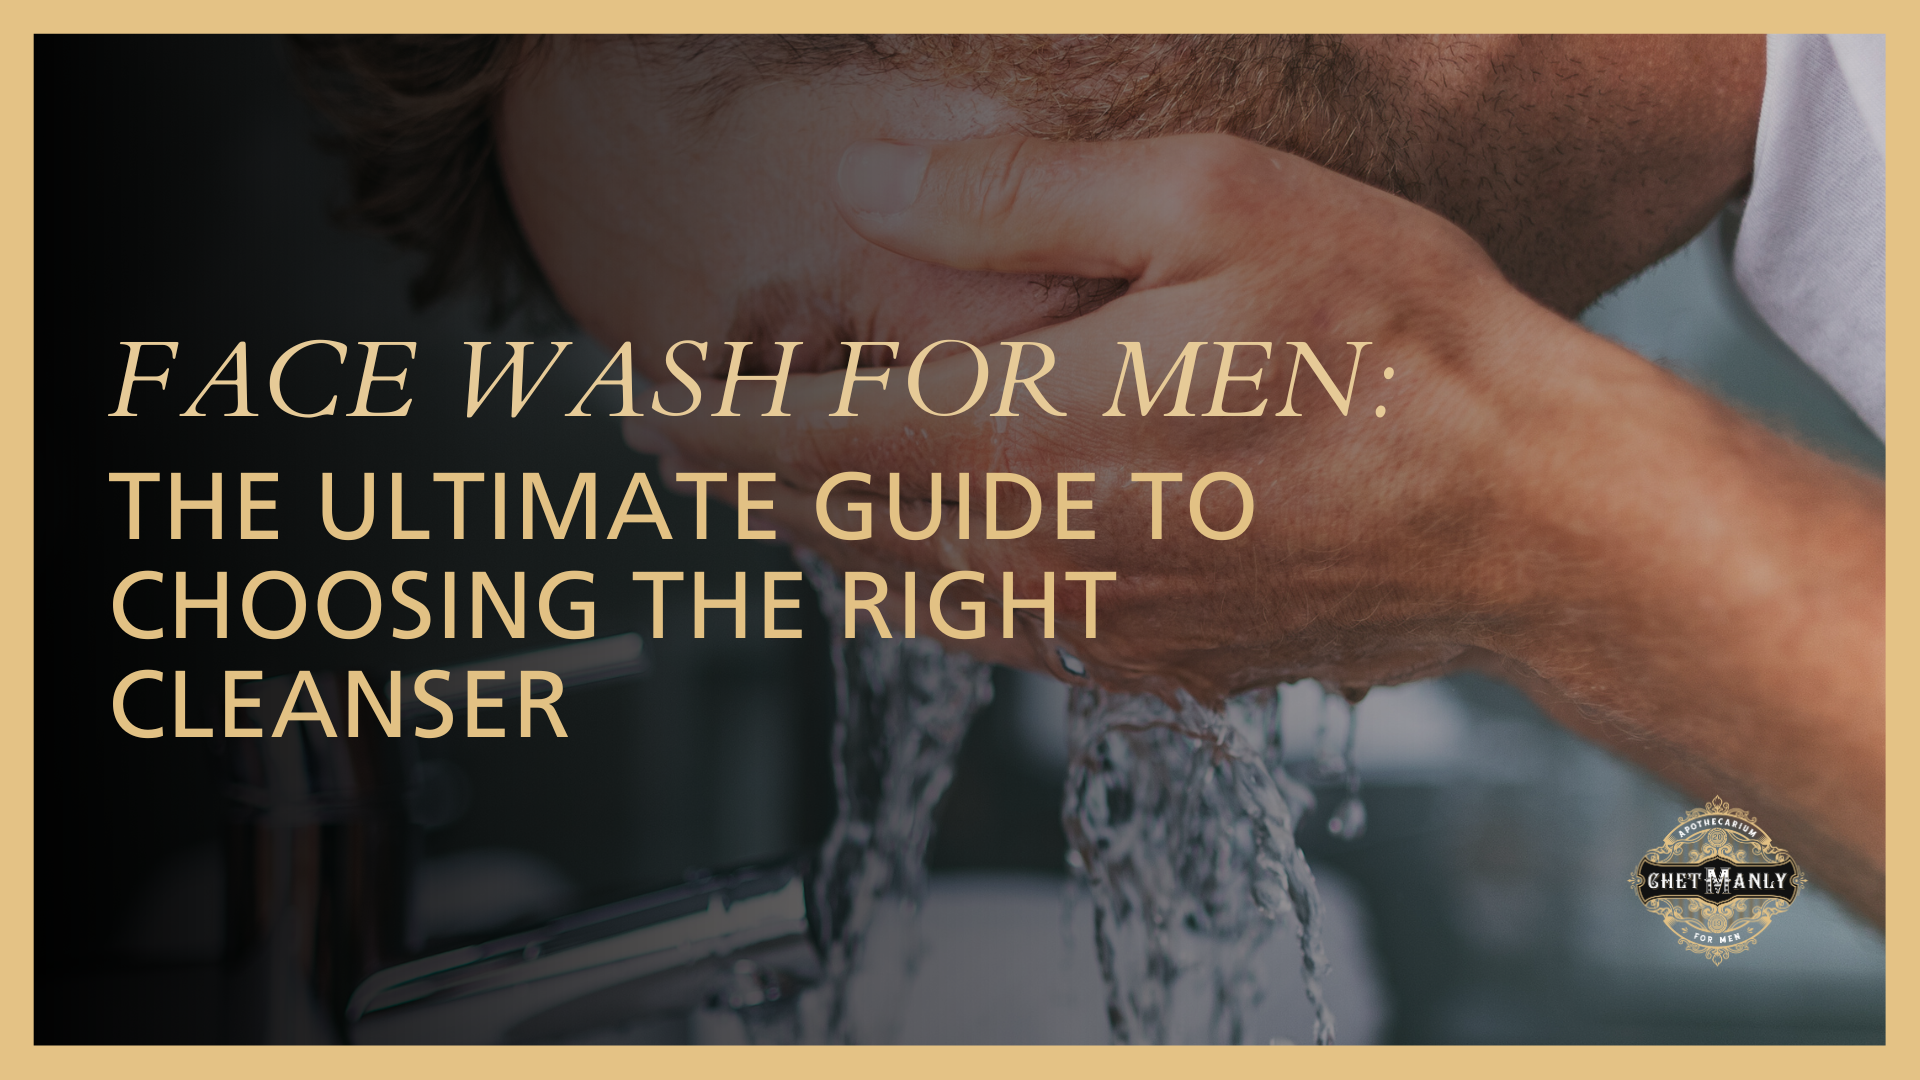 Face Wash for Men: The Ultimate Guide to Choosing the Right Cleanser